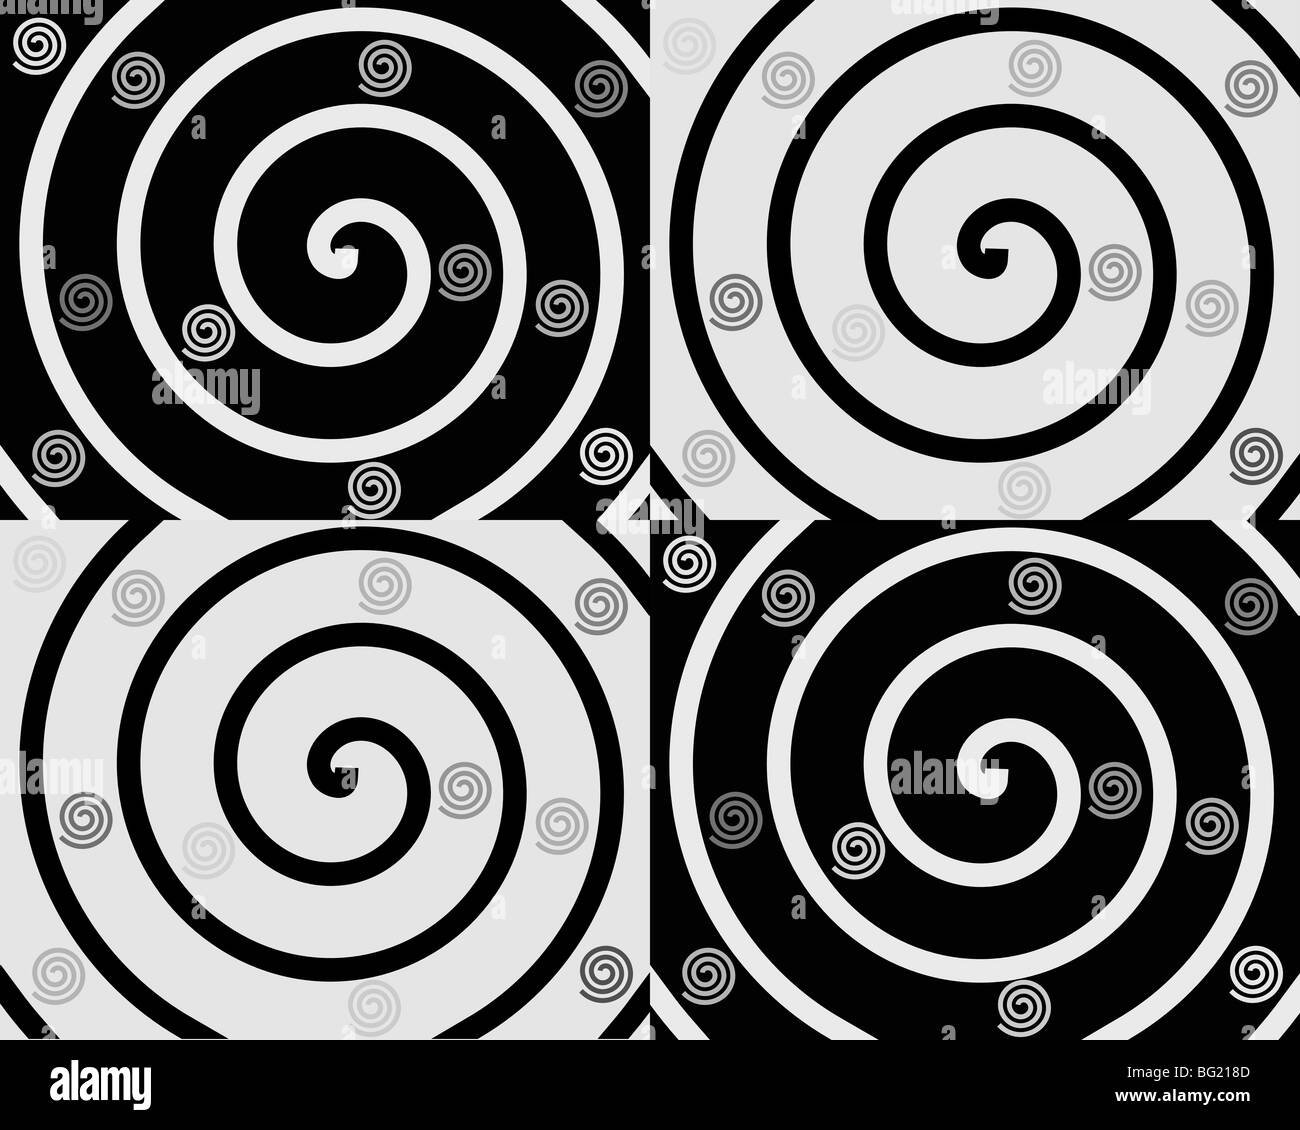 Details of spirals on black and white backgrounds Stock Photo